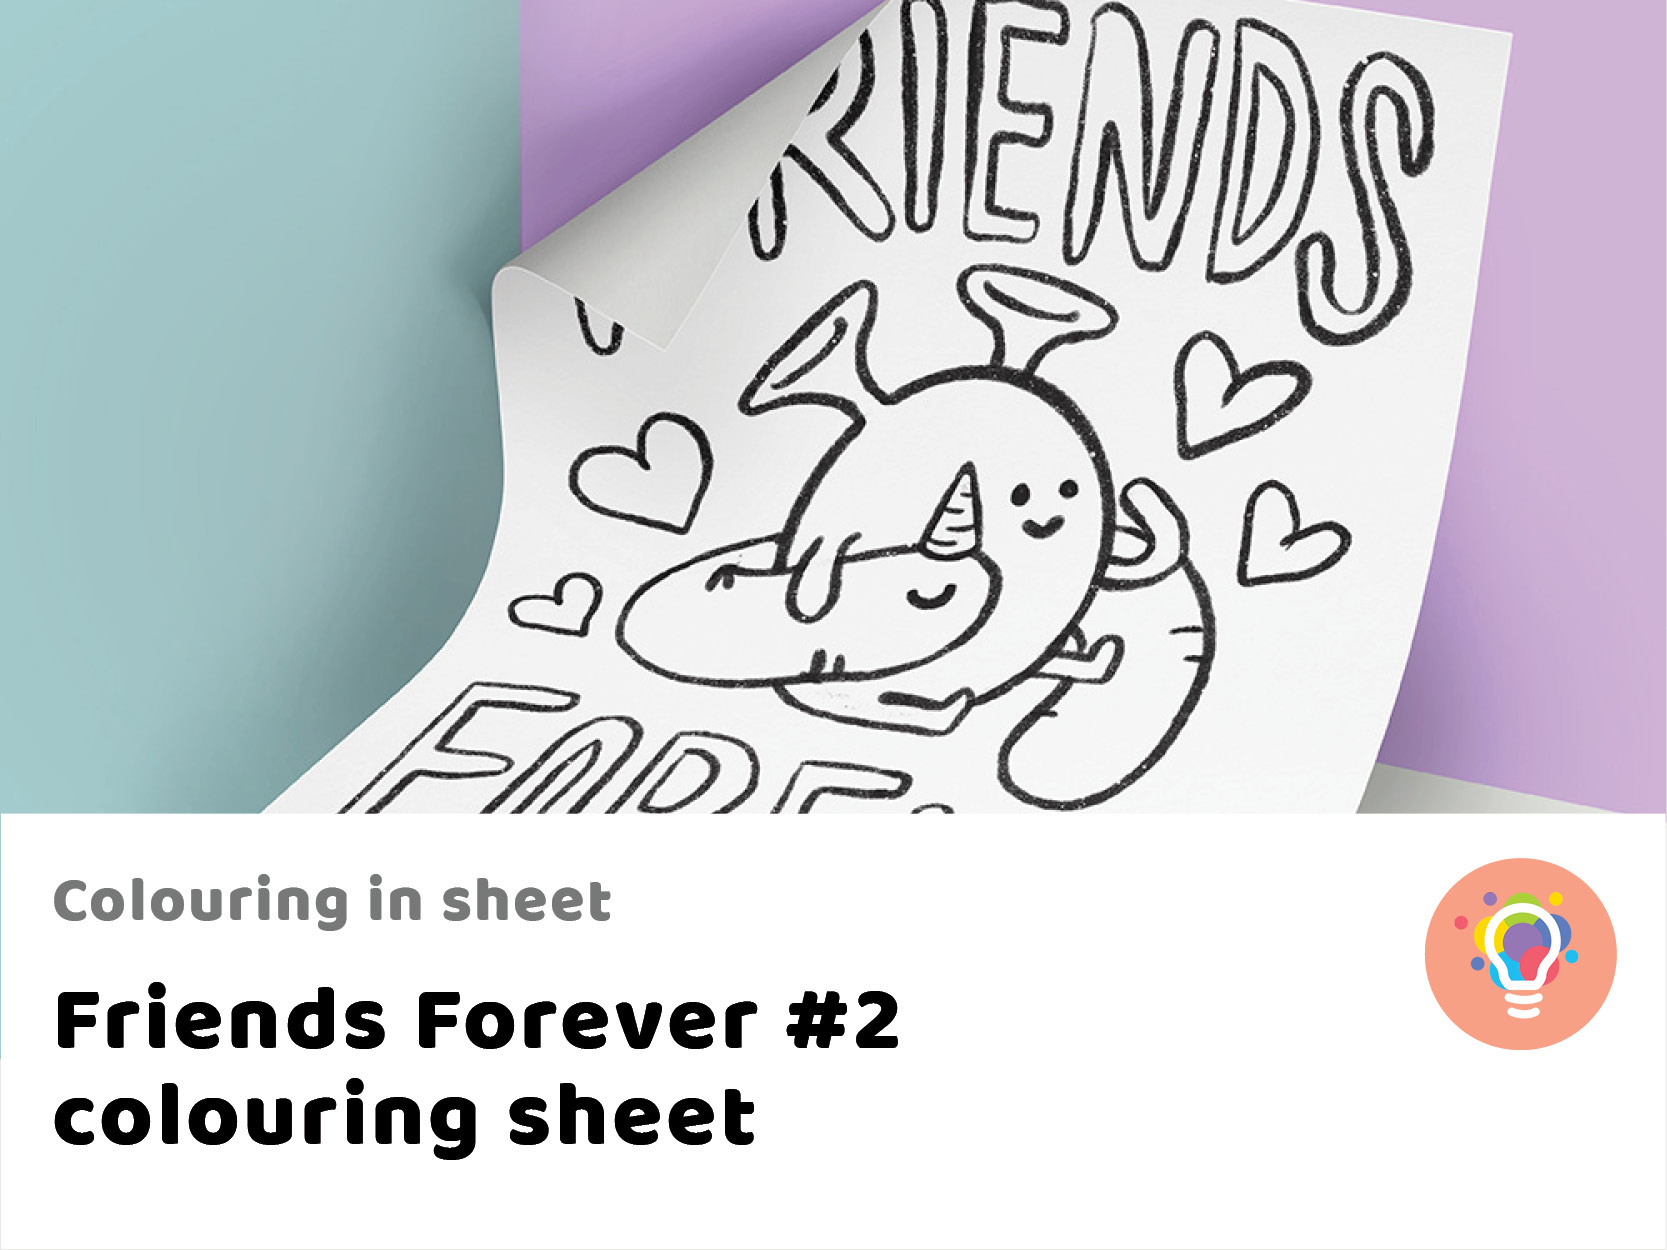 Friends Forever #2 colouring sheet